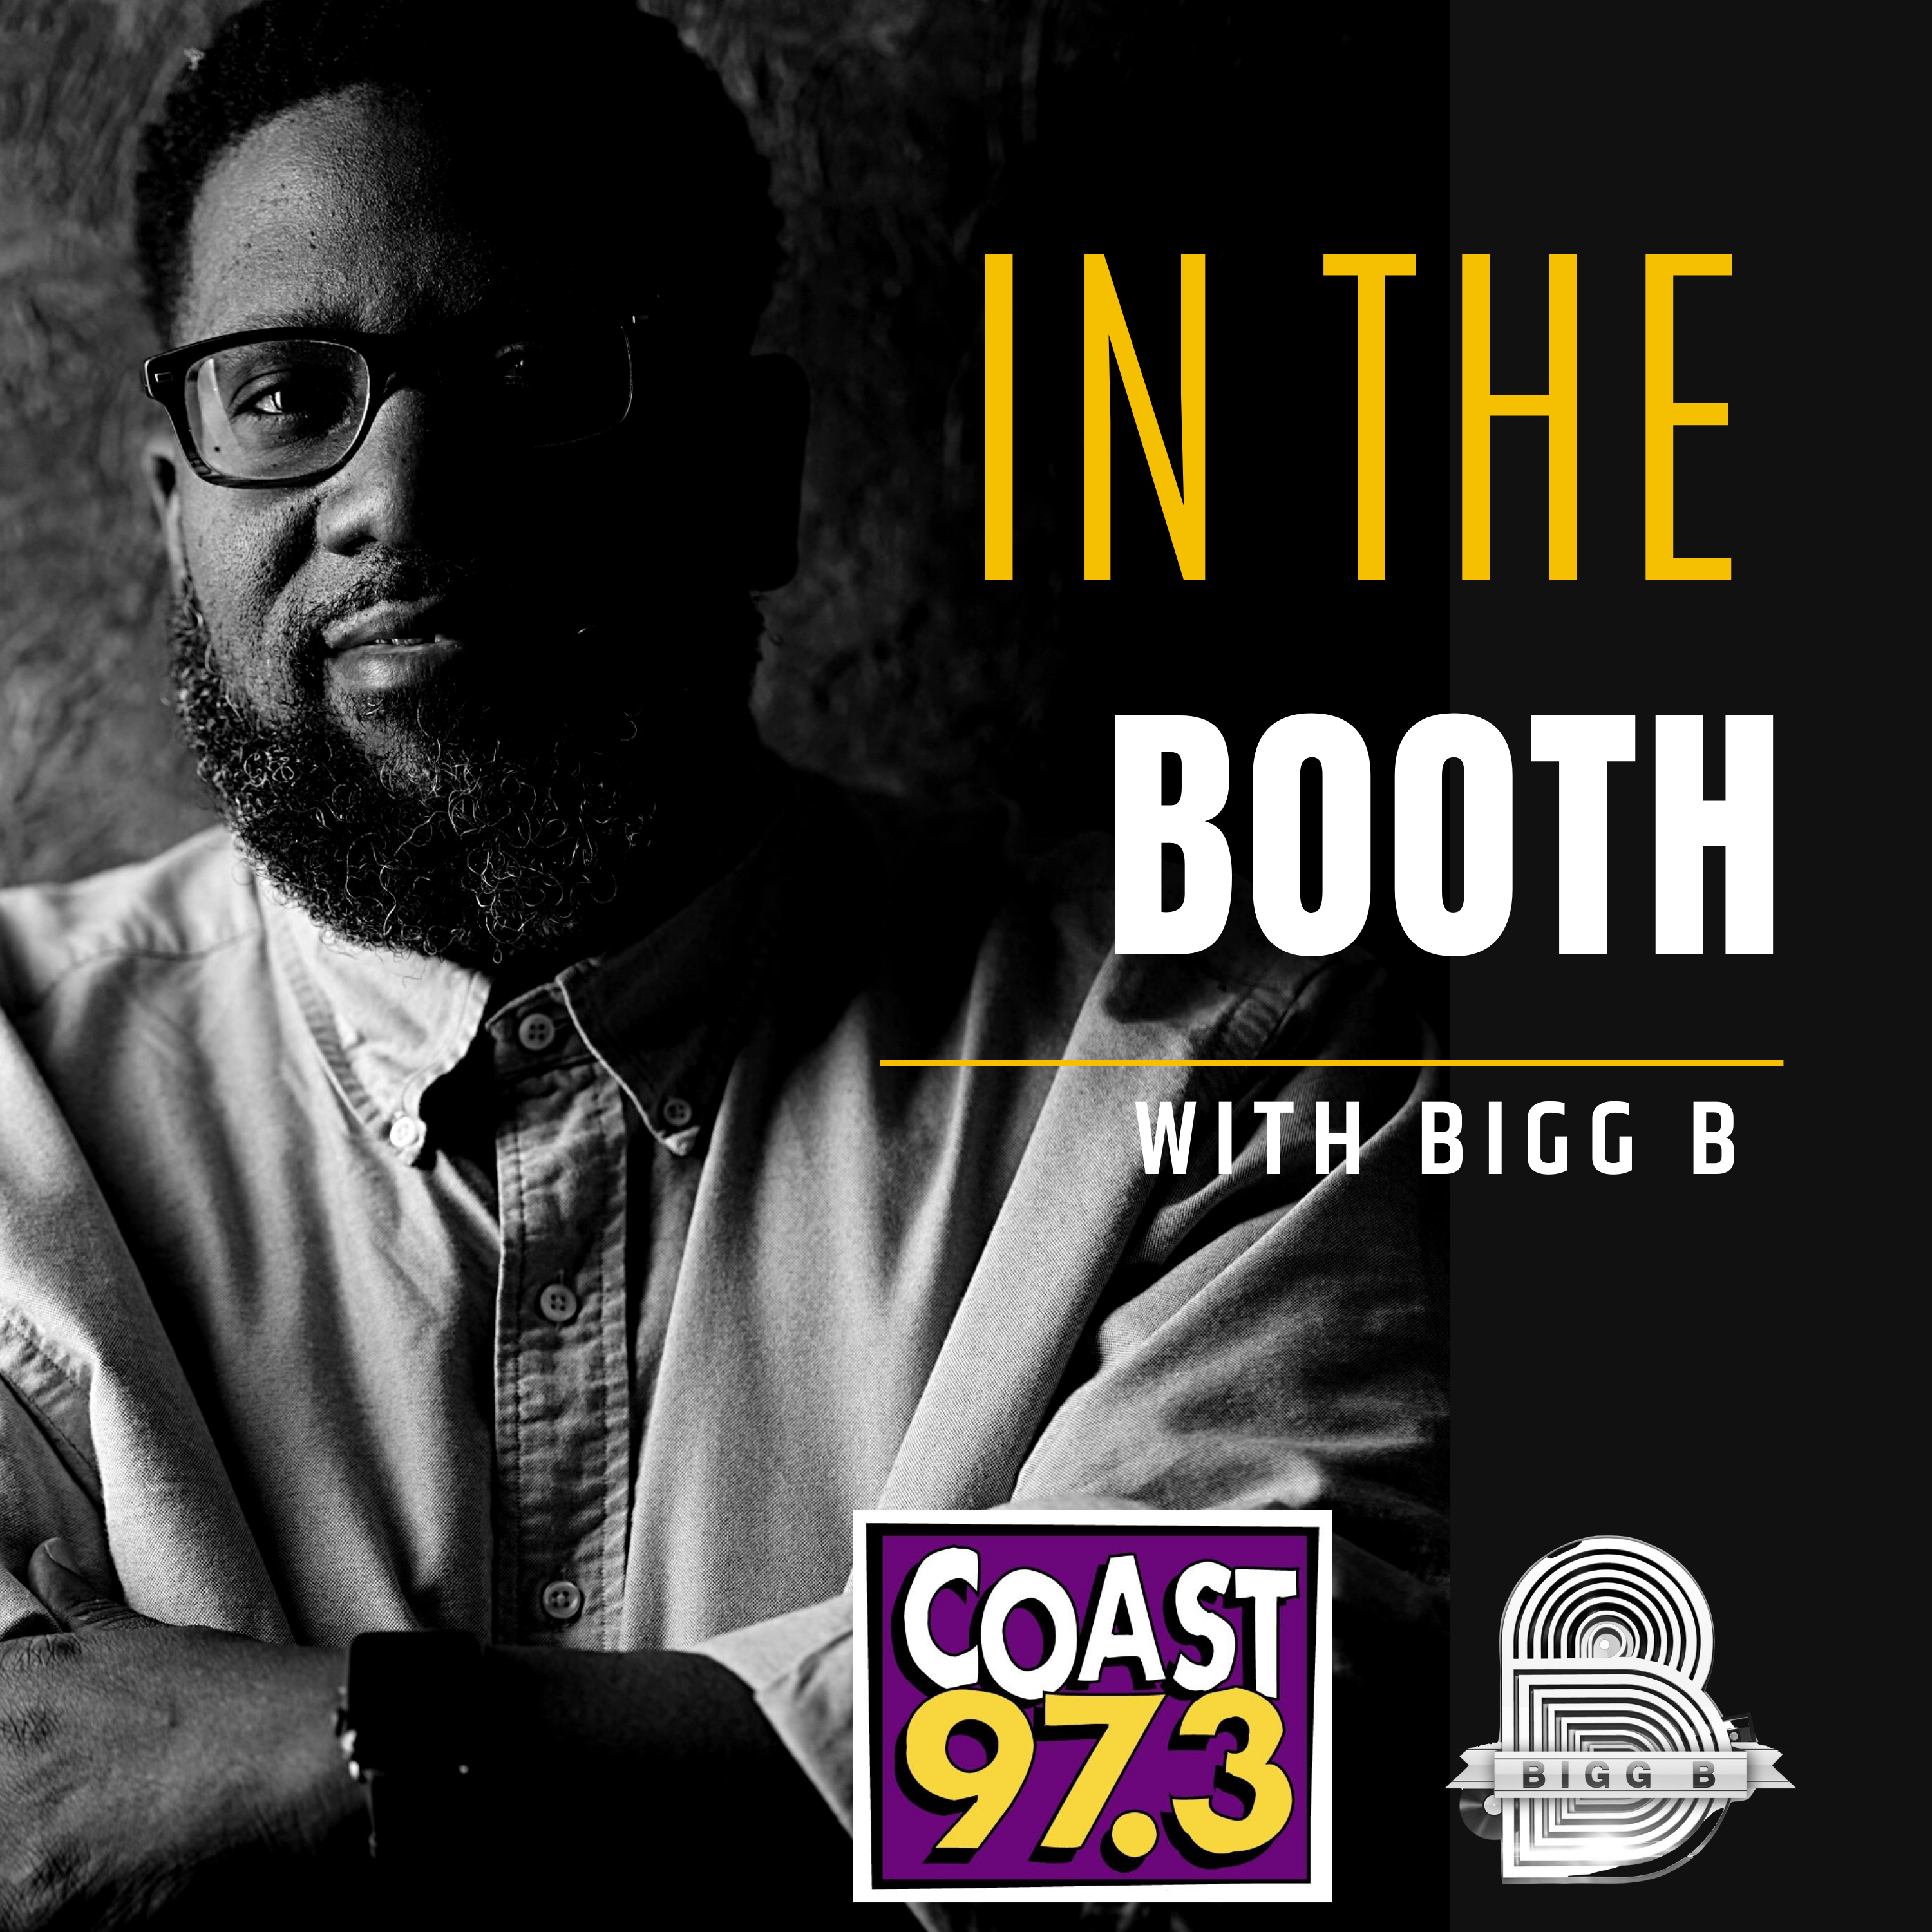 In the Booth with Bigg B and City Councilman Kevin Spears:  Keep the Black Lives Do Matter sign up!